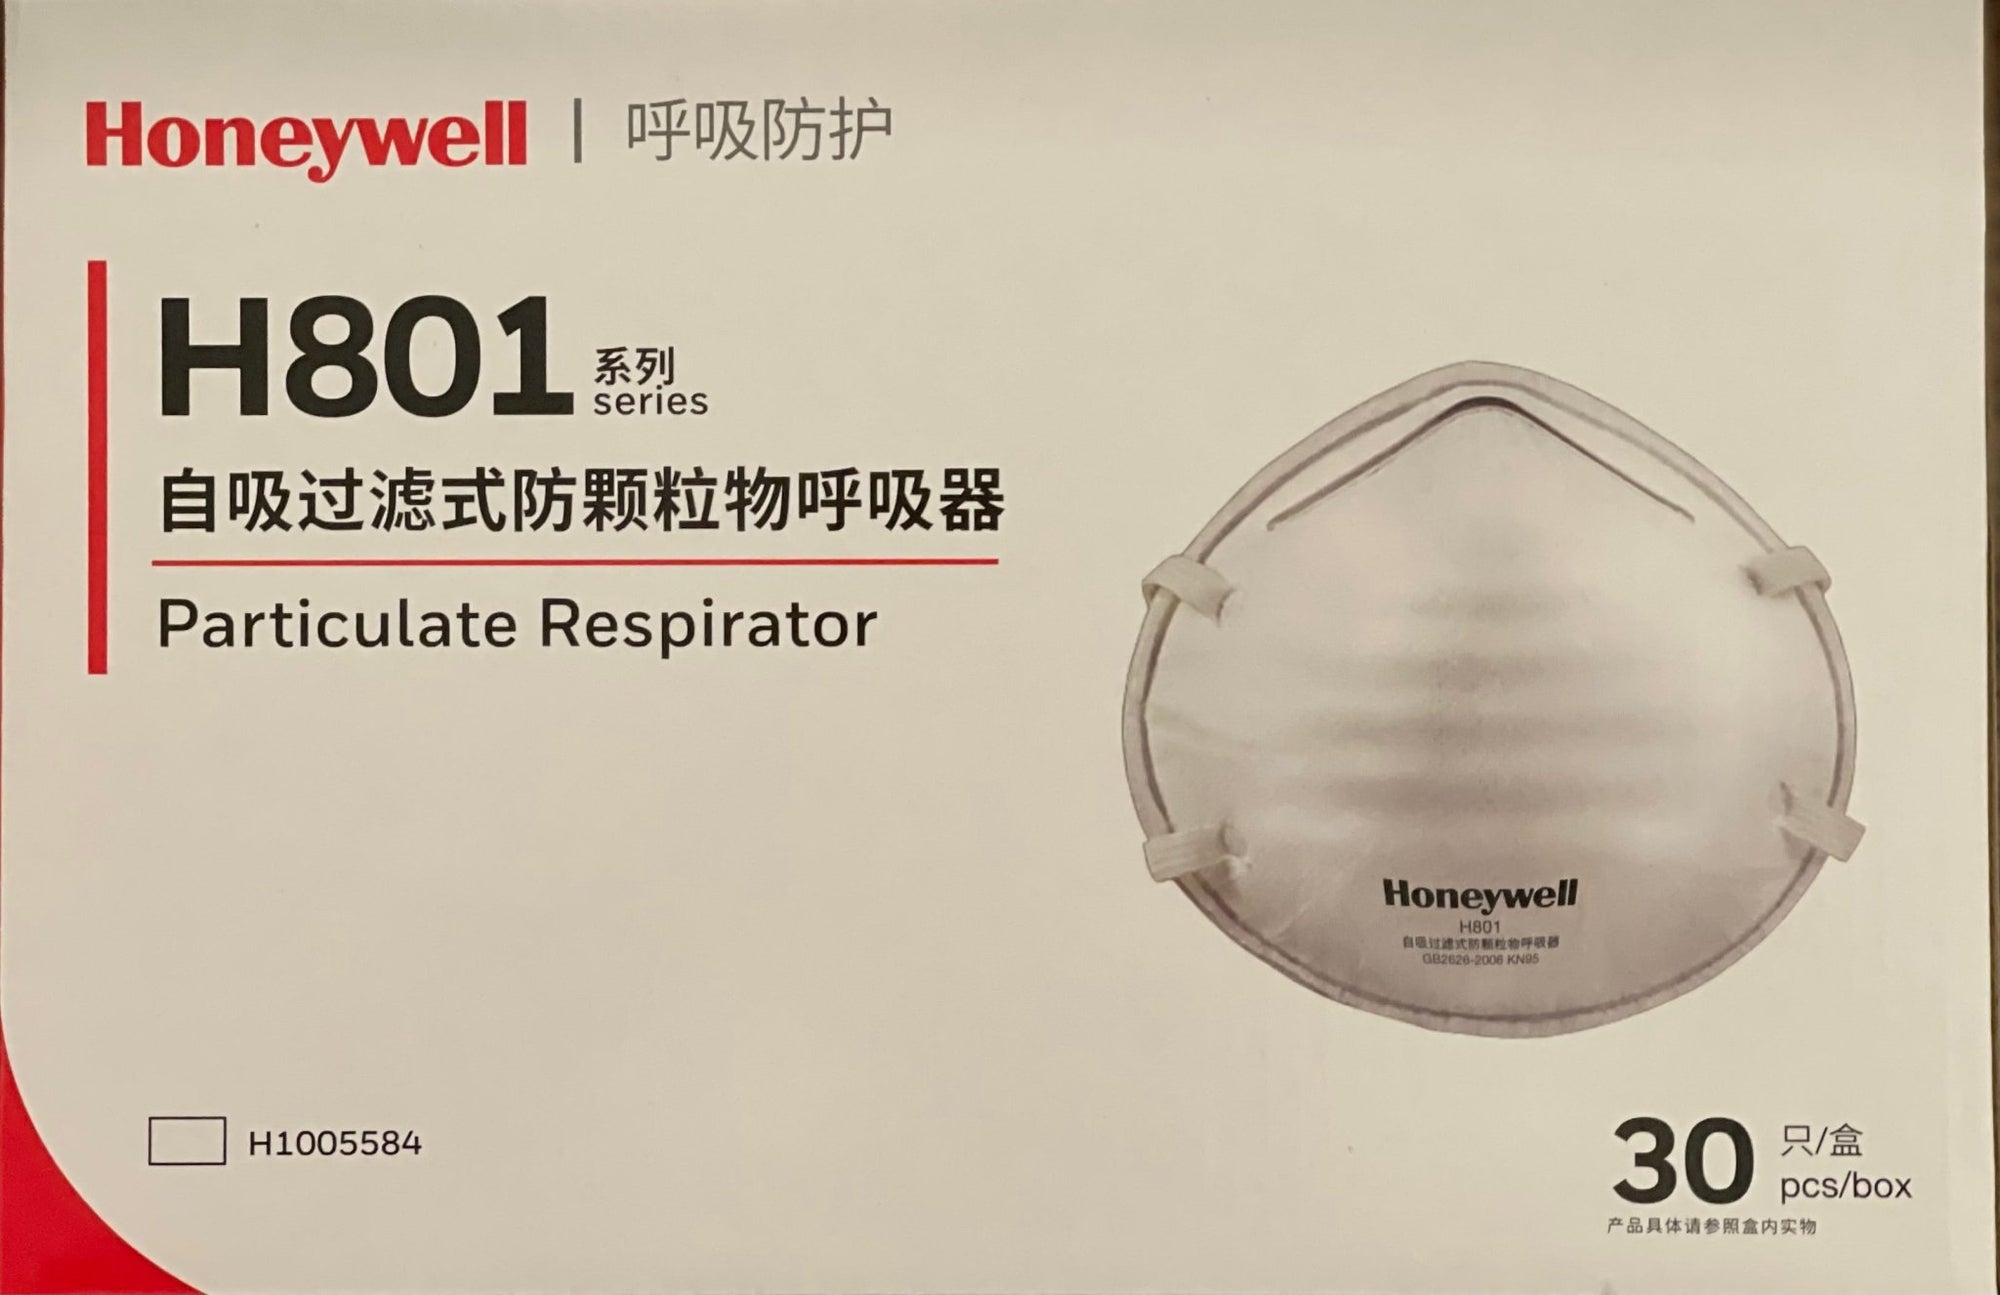 Honeywell H801 KN95 Particulate Respirator 30 Pack (Small Size) - SafeTMed